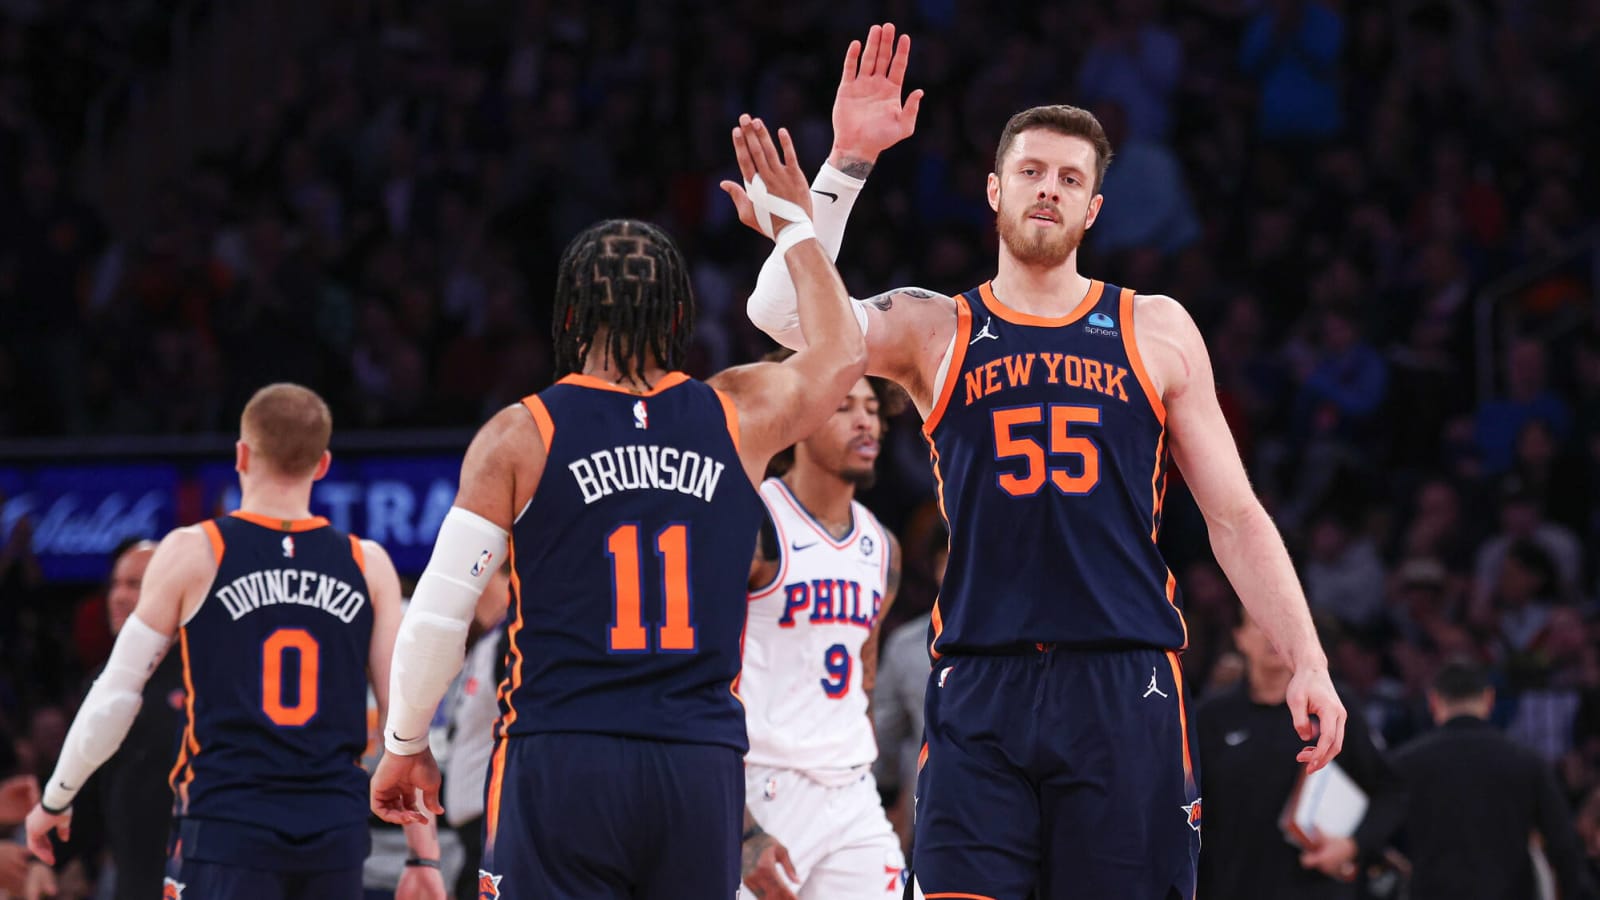 The Knicks' defense made history in their win over the 76ers